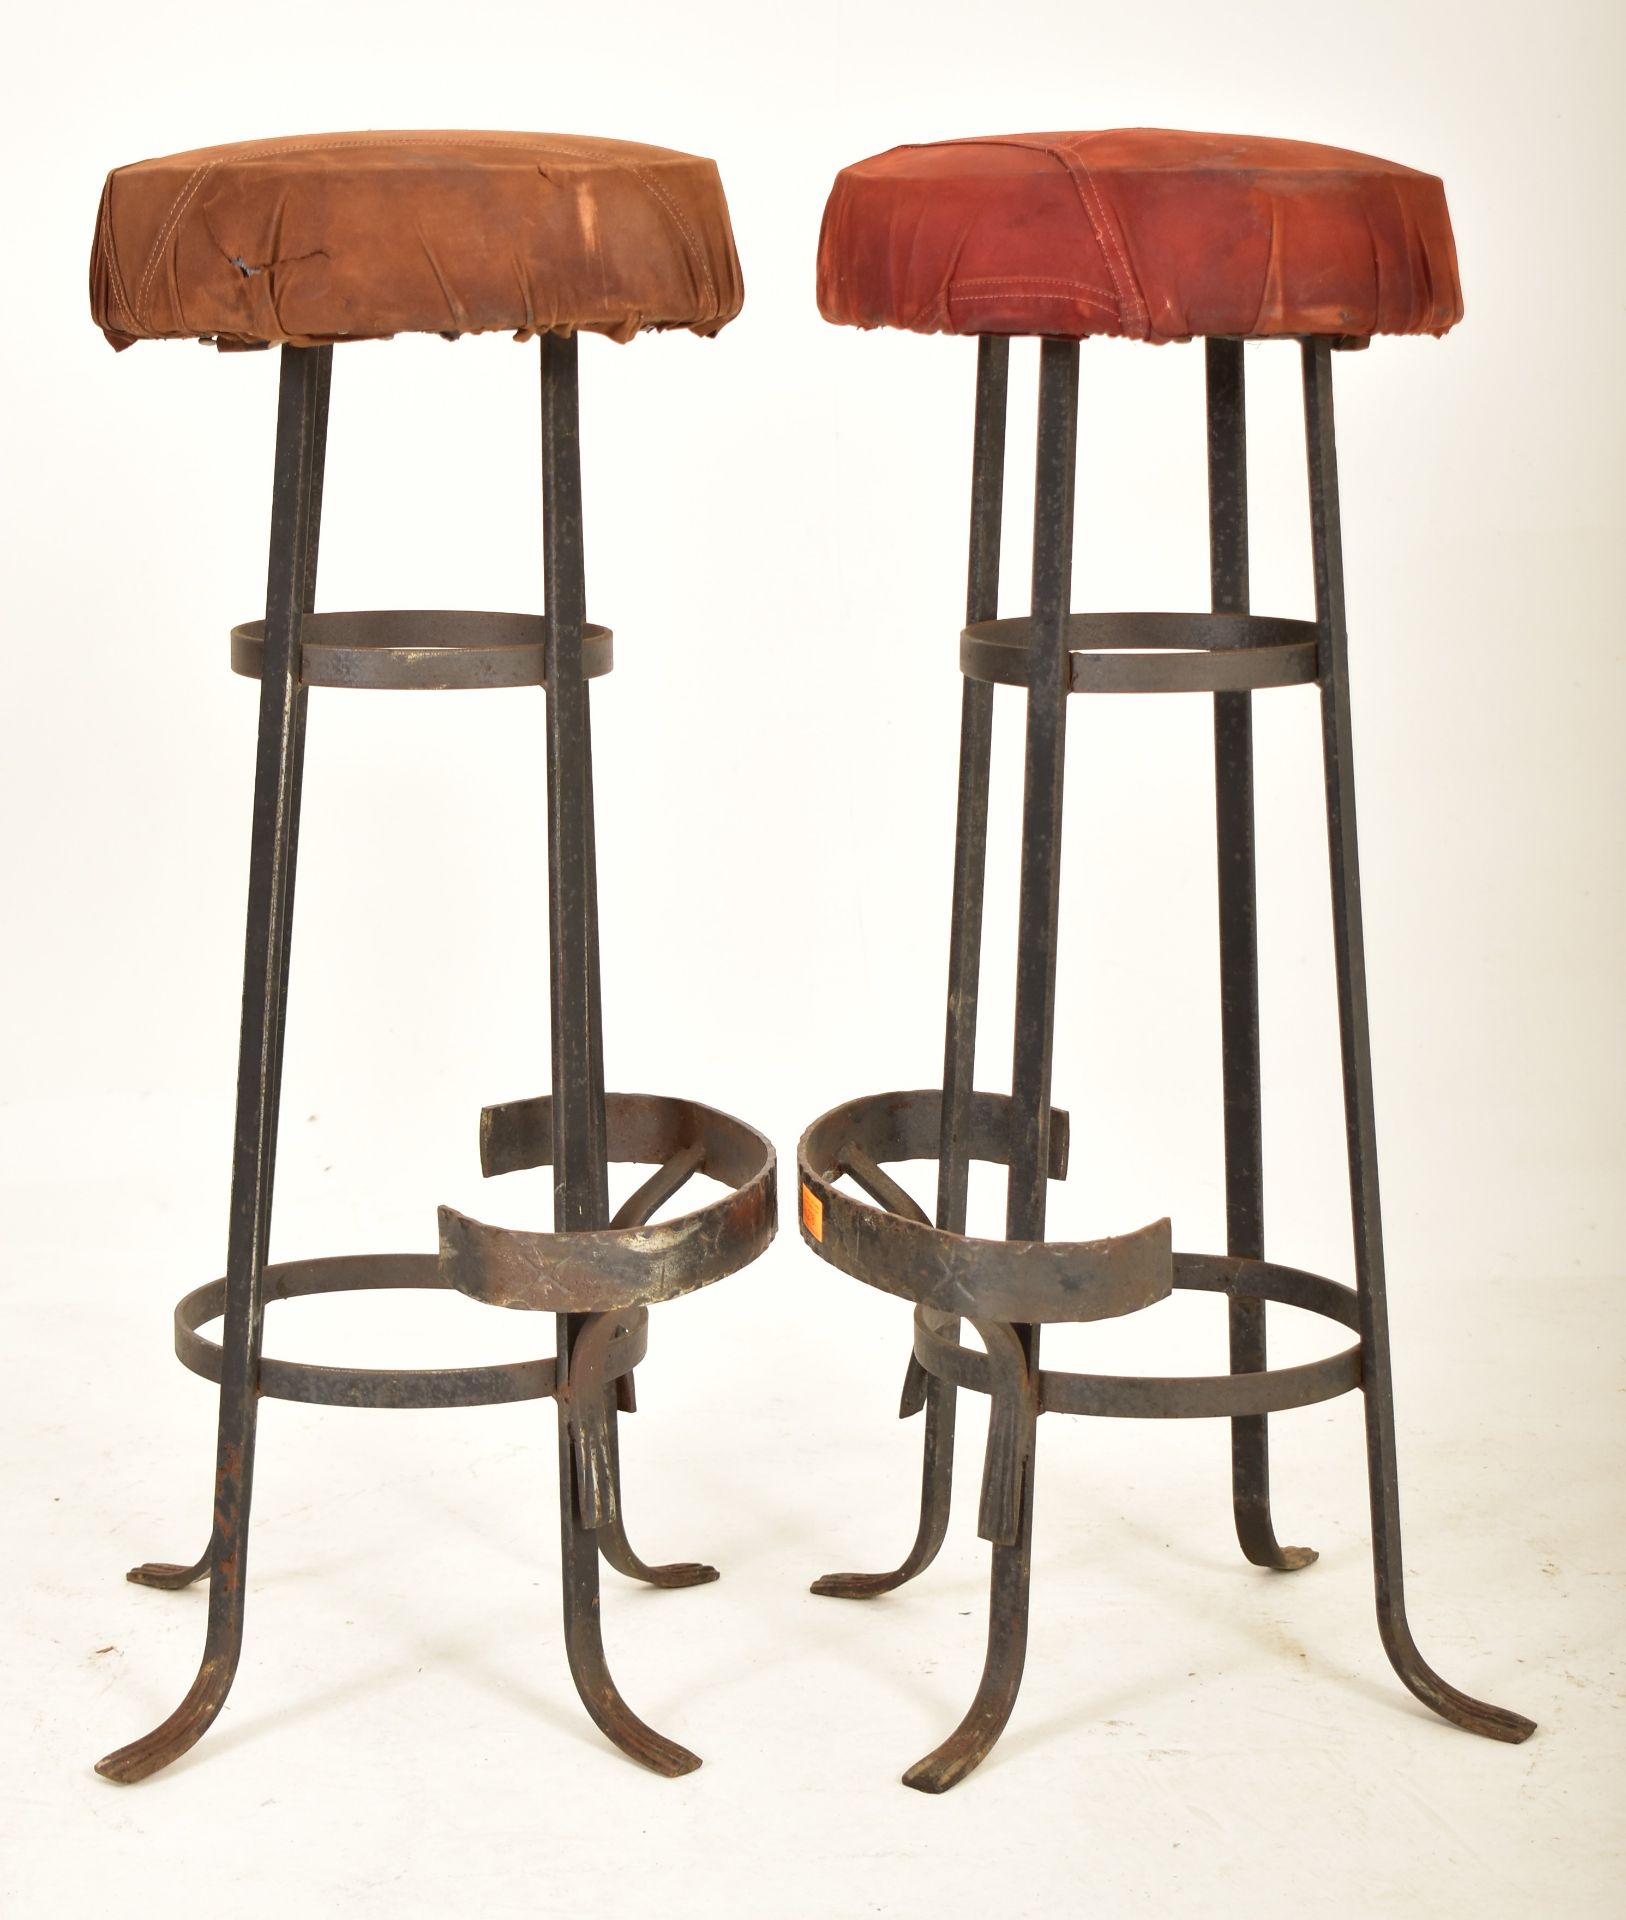 FOUR RETRO 20TH CENTURY SUEDE & WROUGHT IRON BAR STOOLS - Image 3 of 7